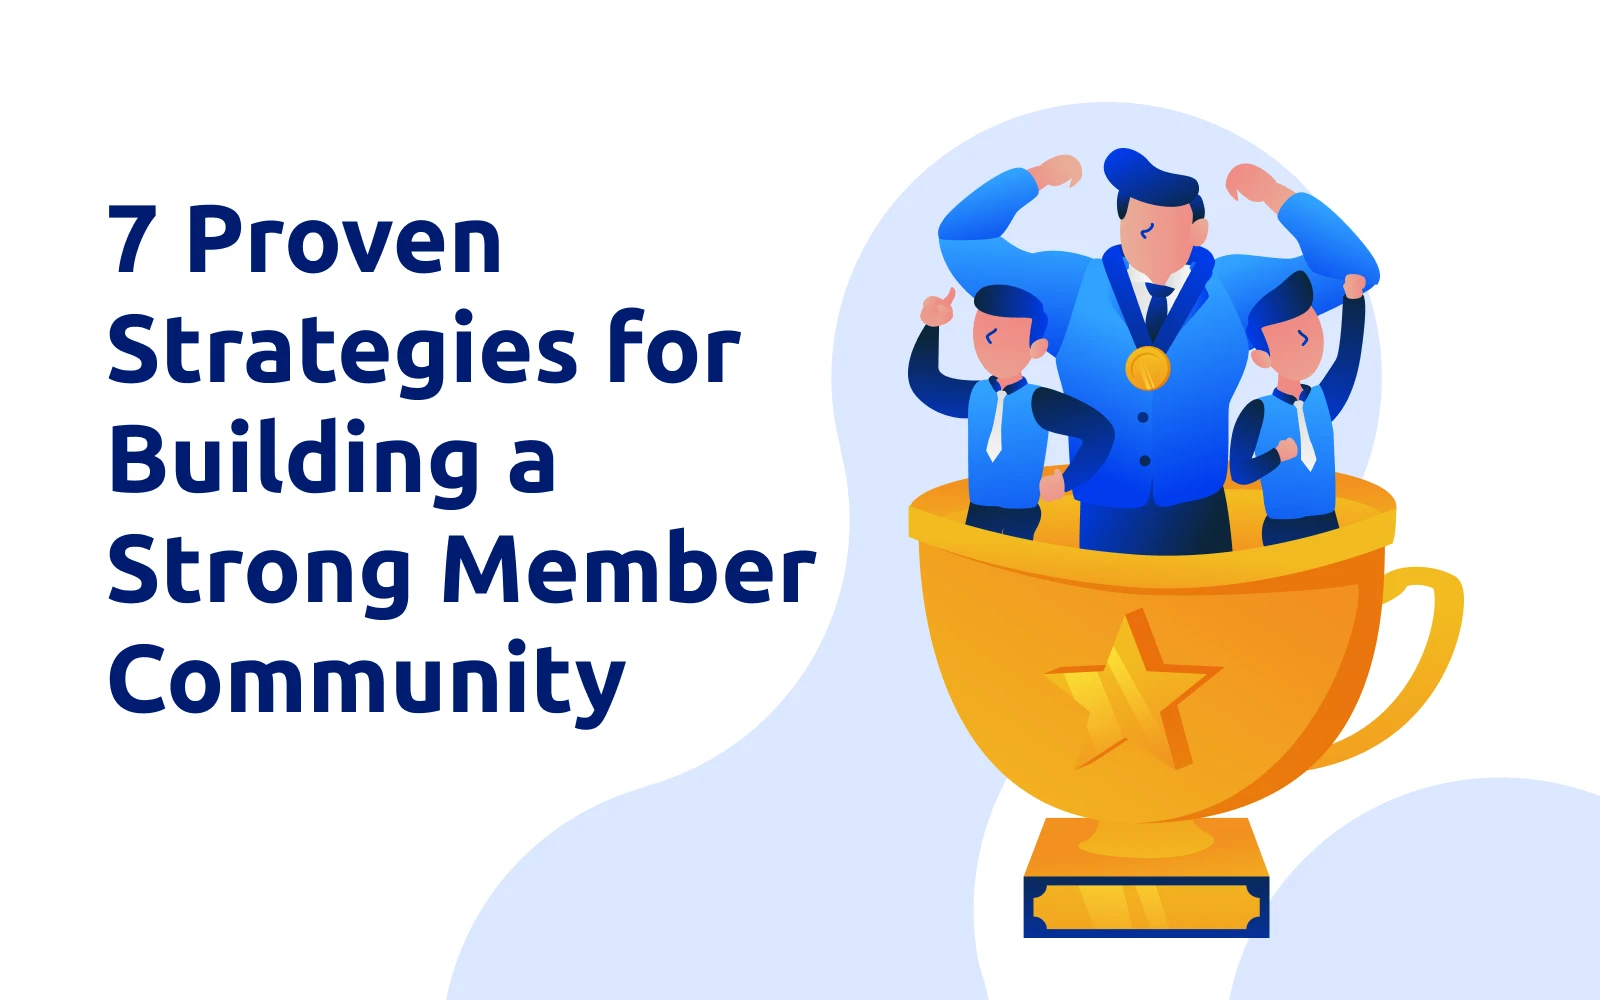 7 Proven Strategies for Building a Strong Member Community